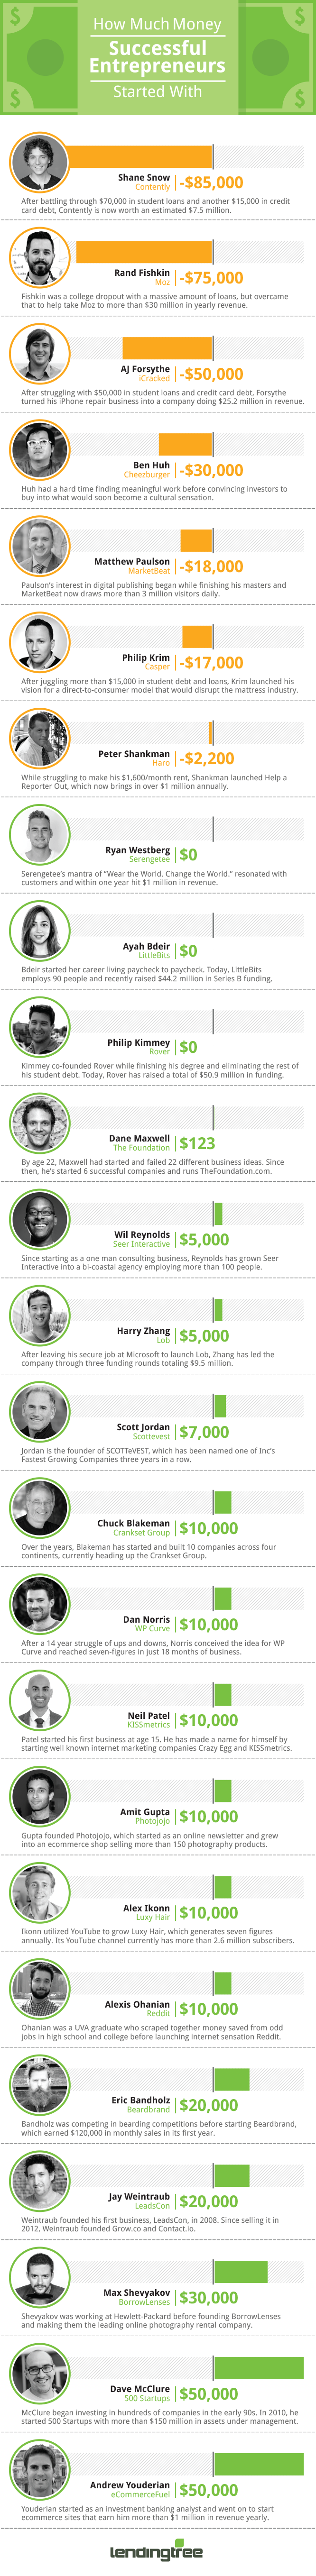 How-Much-Money-Entrepreneurs-Started-With